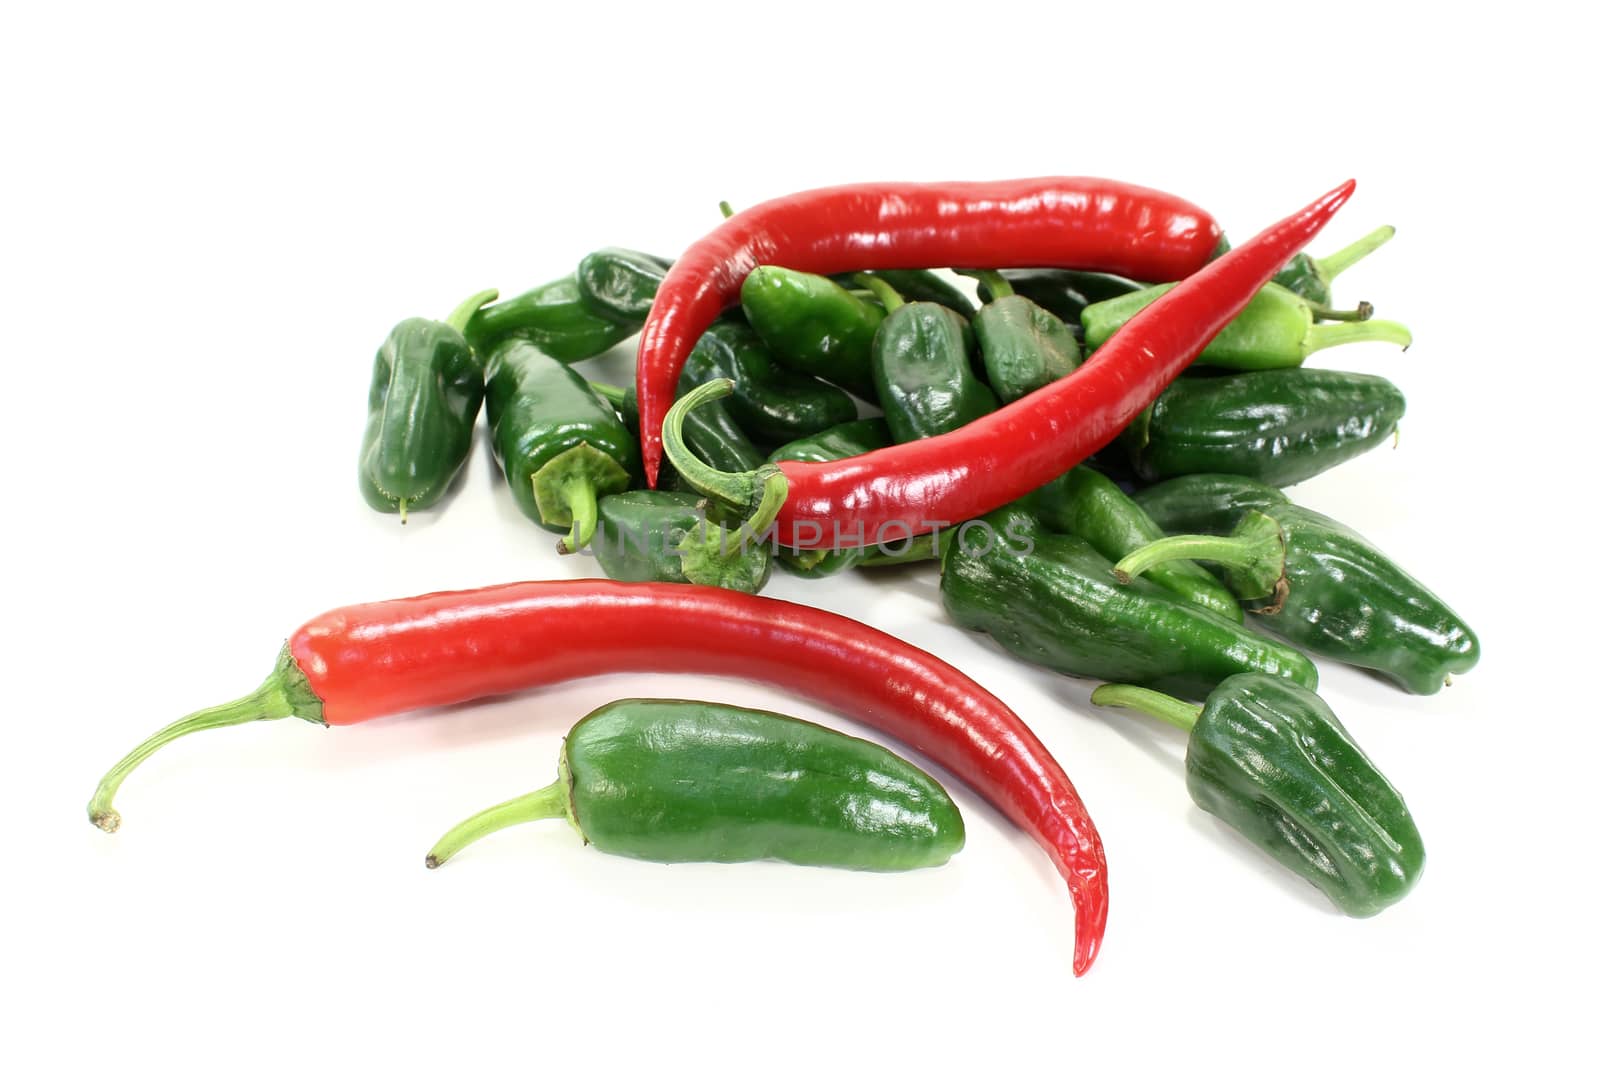 Pimientos with hot peppers by discovery